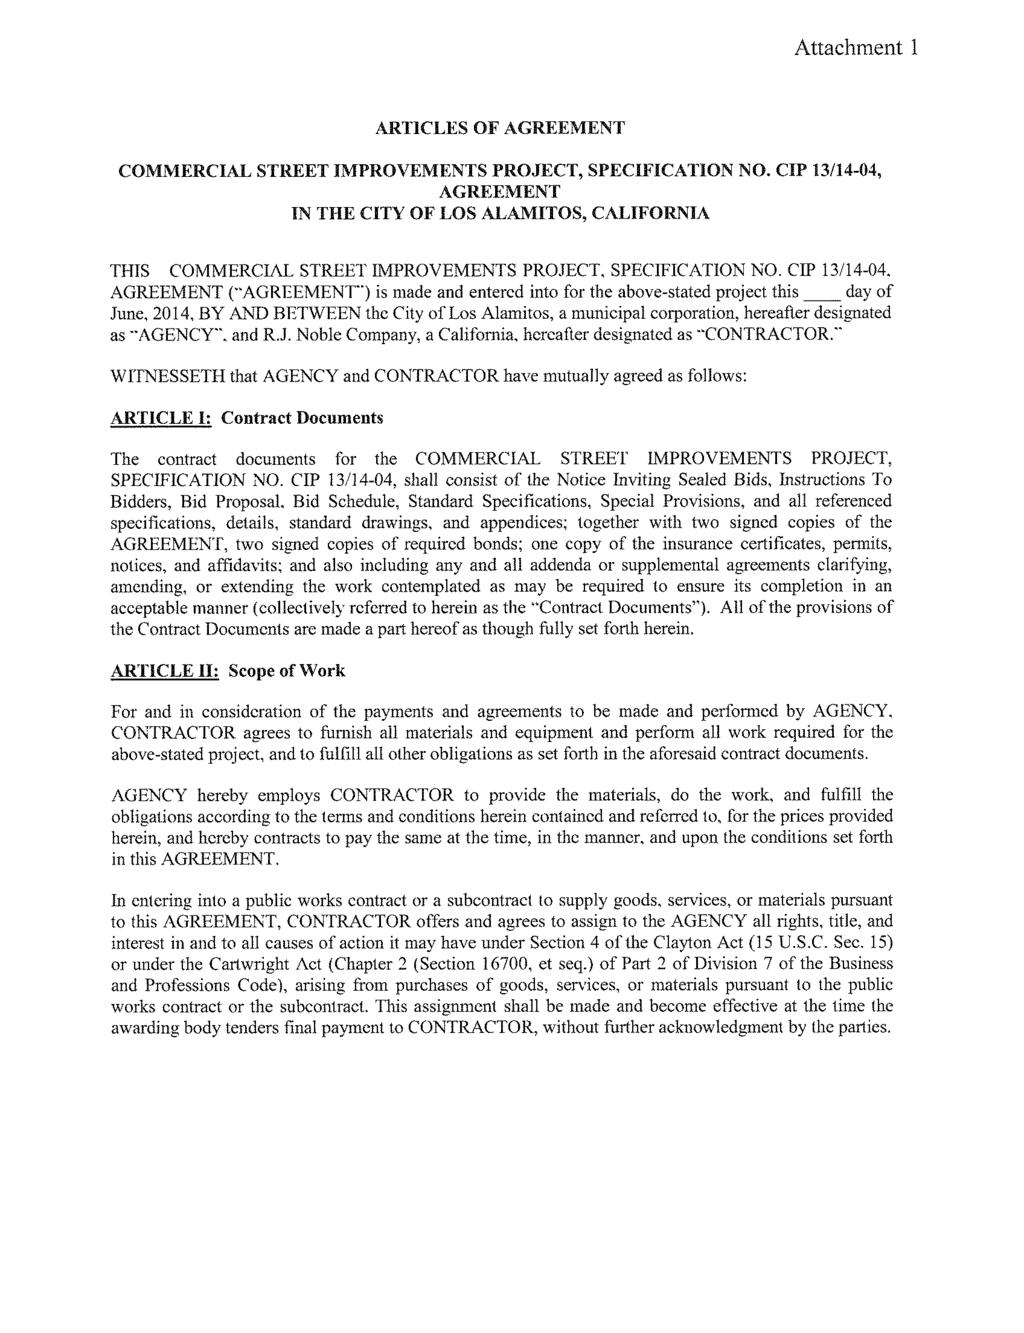 Attachment 1 ARTICLES OF AGREEMENT COMMERCIAL STREET IMPROVEMENTS PROJECT, SPECIFICATION NO.